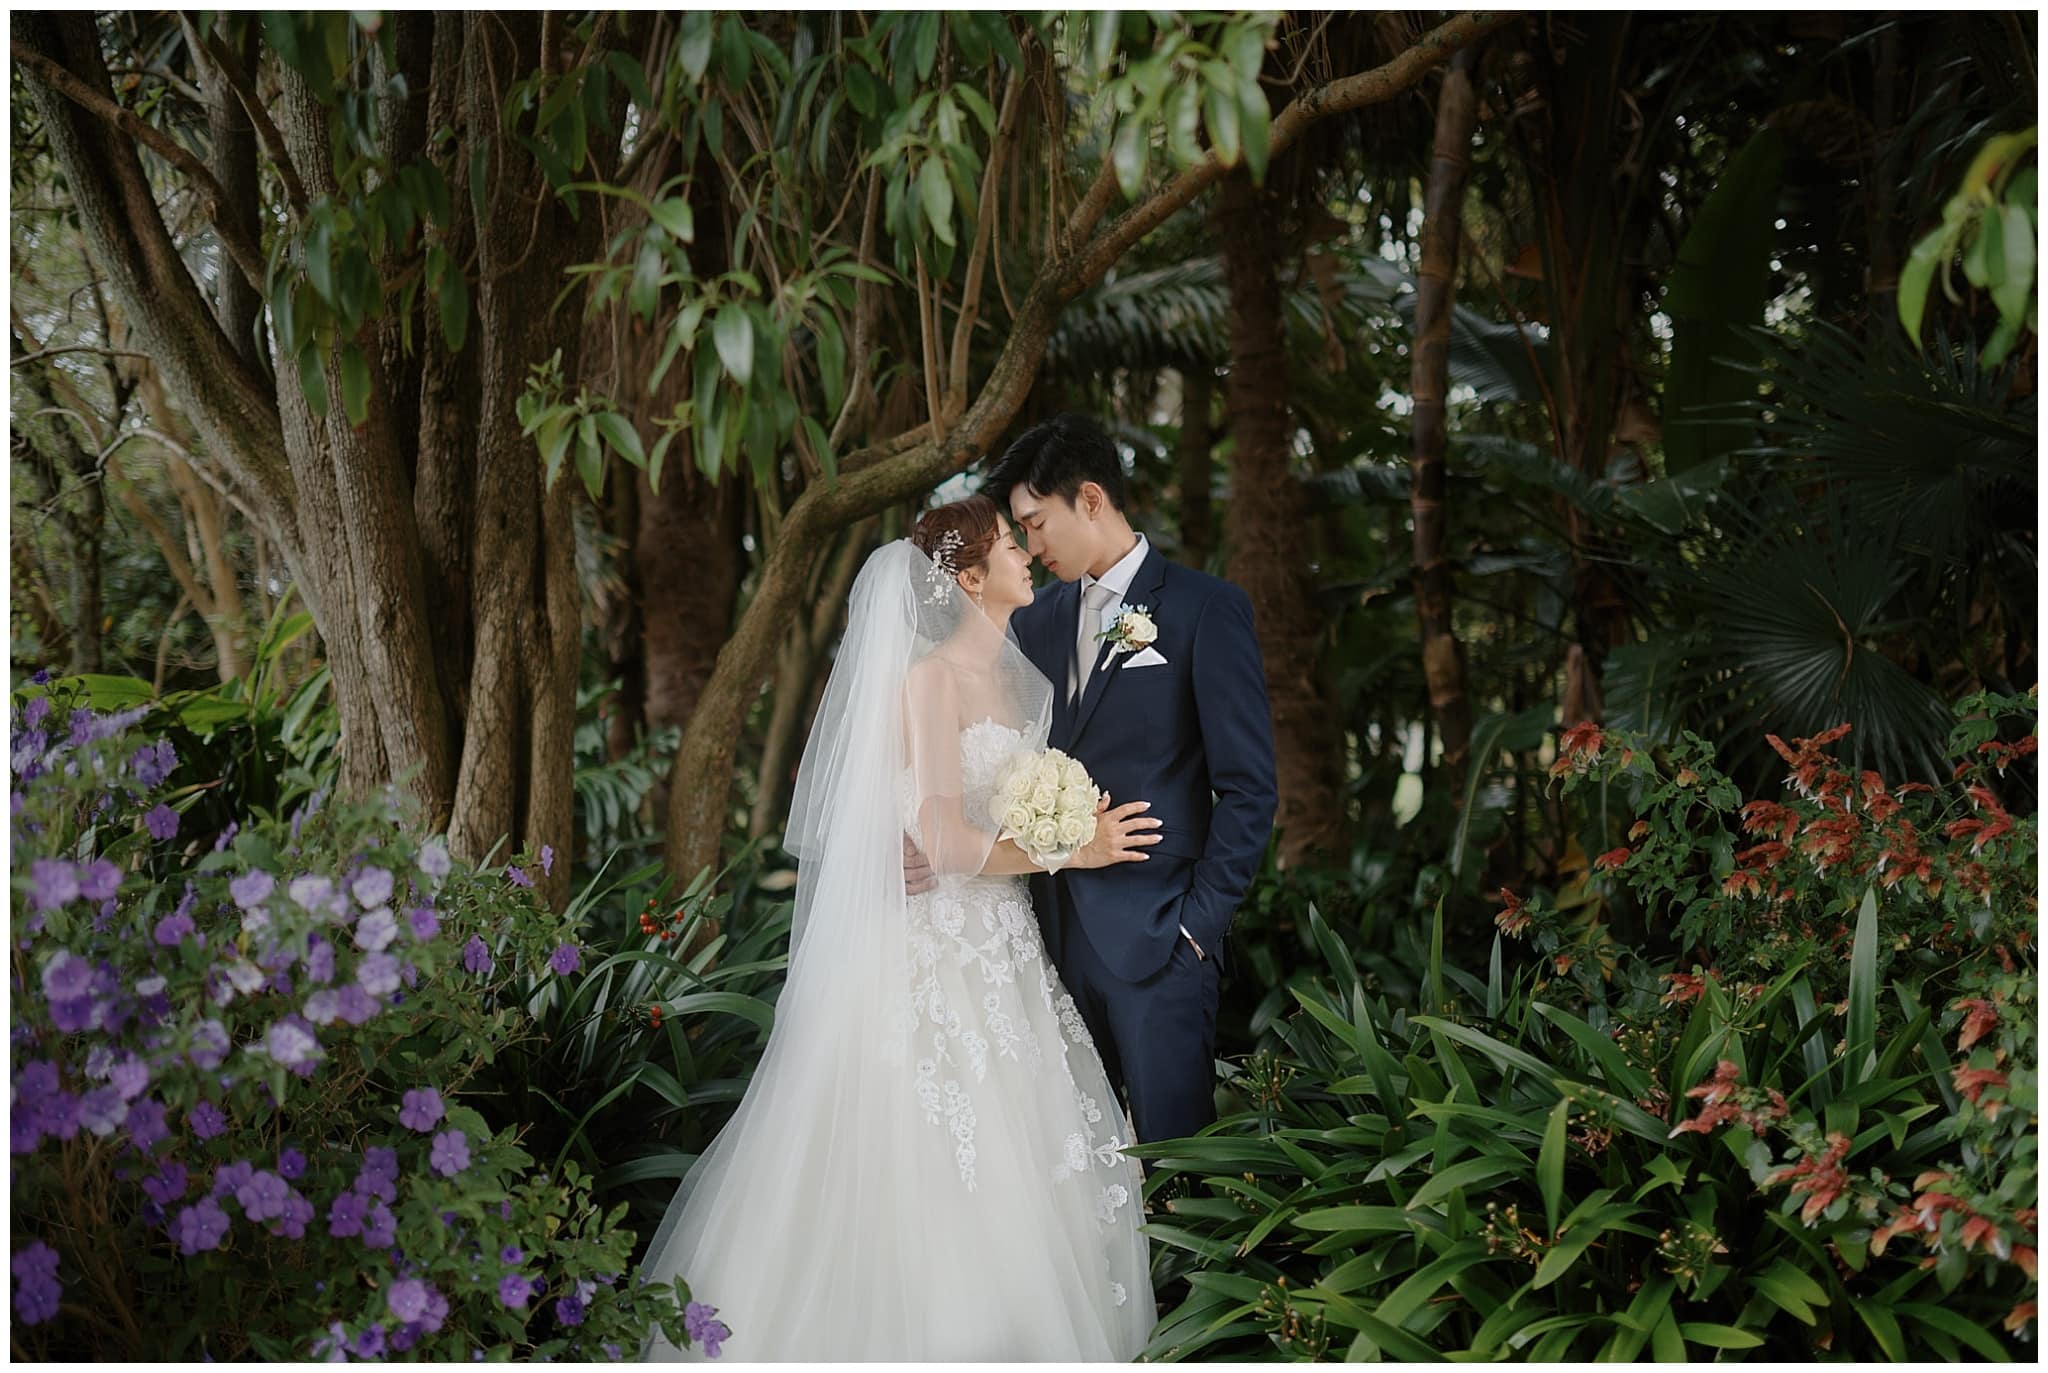 Phoebe & Eric's Auckland NZ Wedding at Holy Trinity Cathedral Parnell